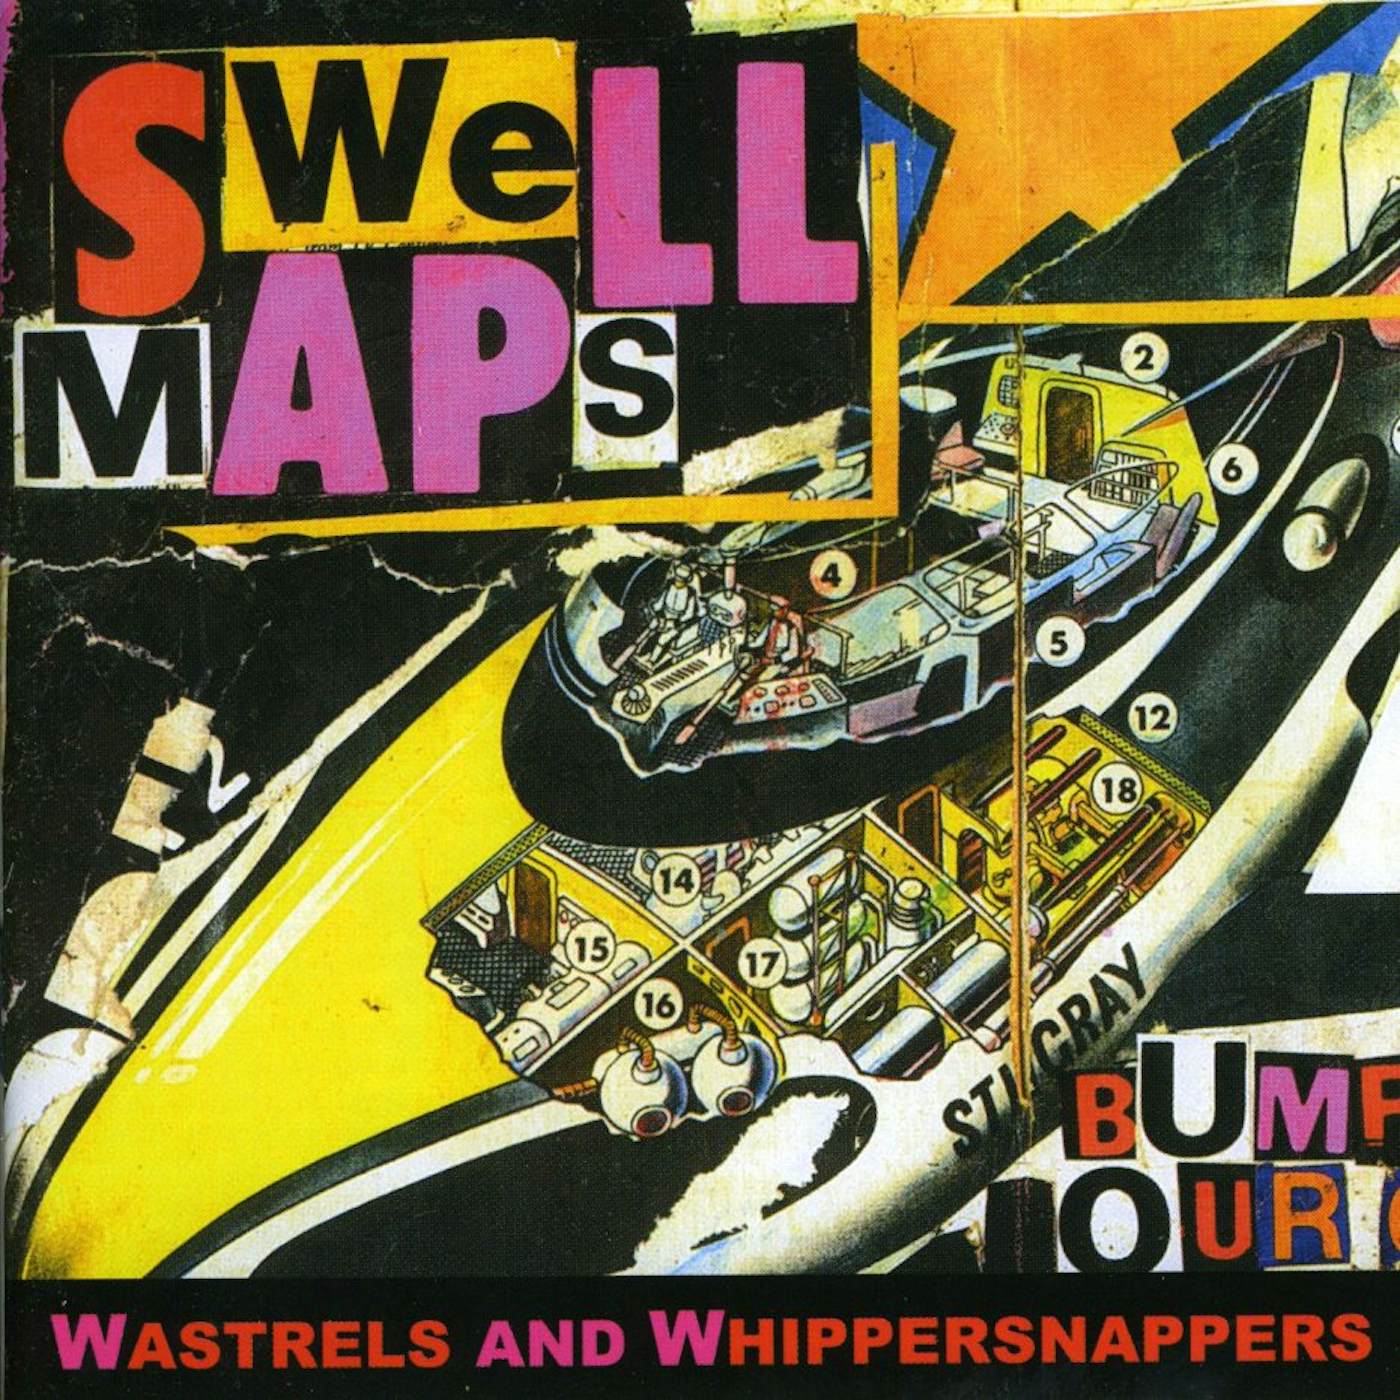 Swell Maps WASTRELS & WHIPPERSNAPPERS CD